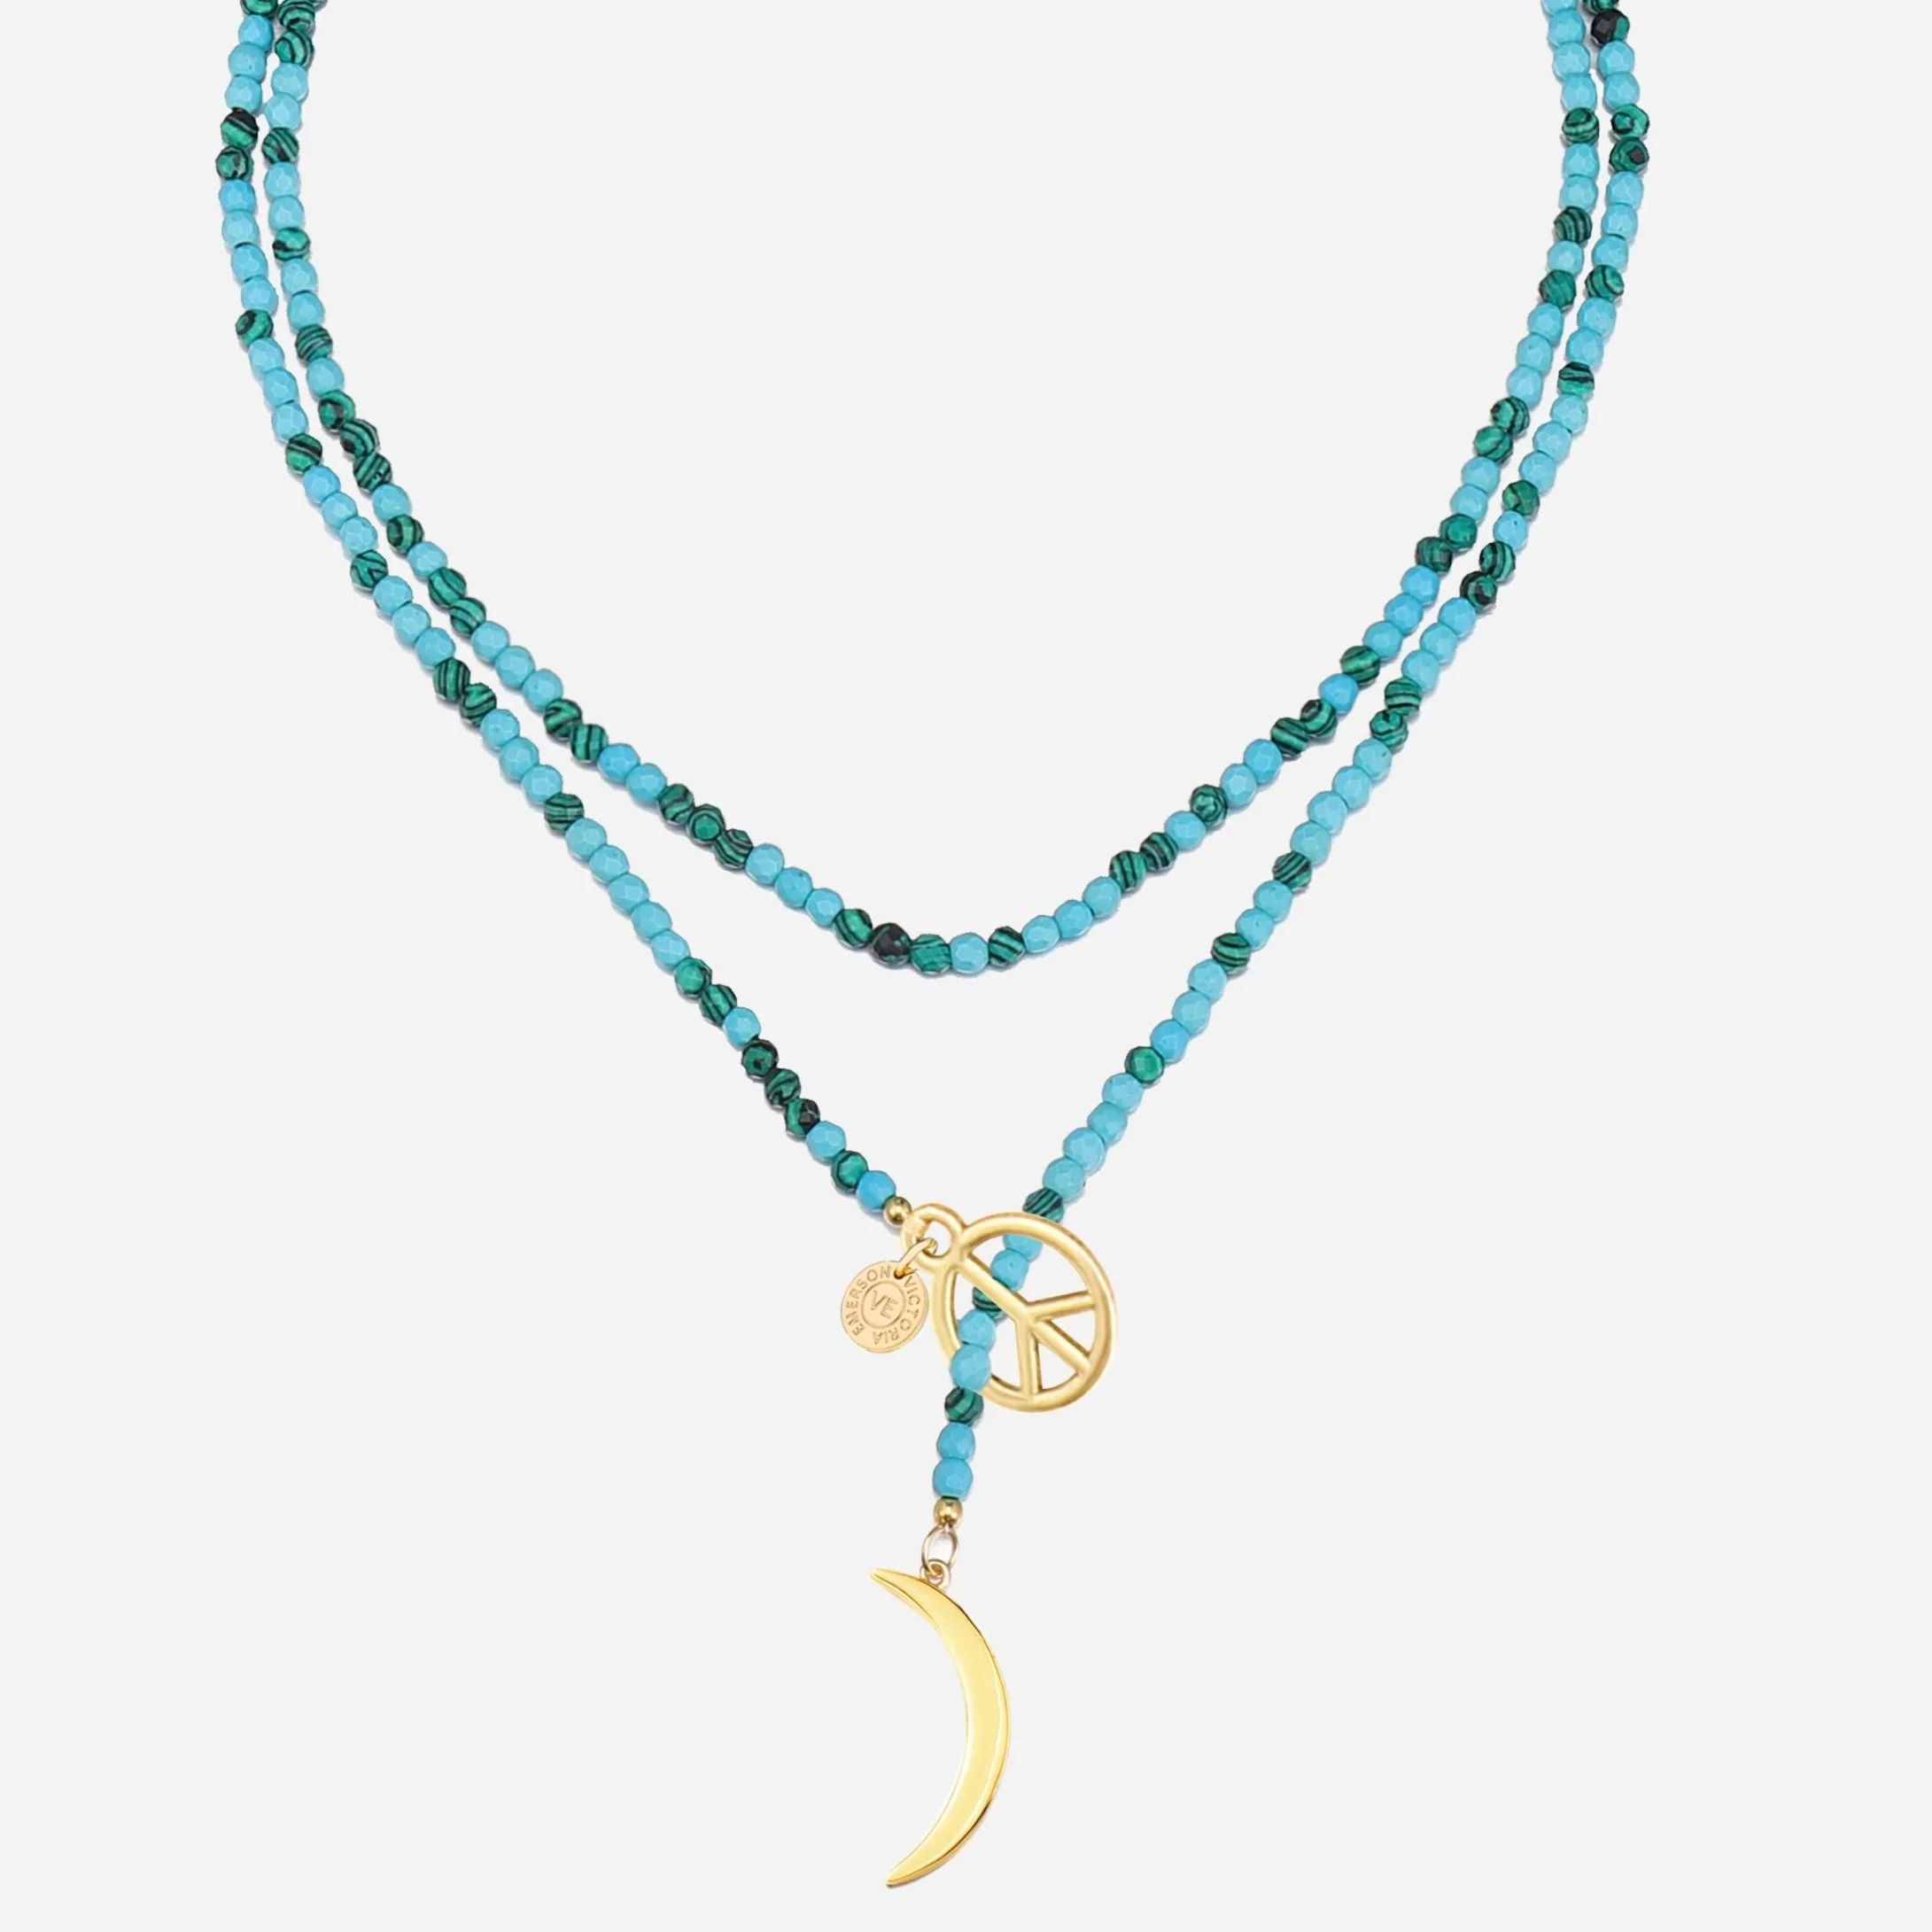 Taylor Beaded Necklace 2.0 | Victoria Emerson